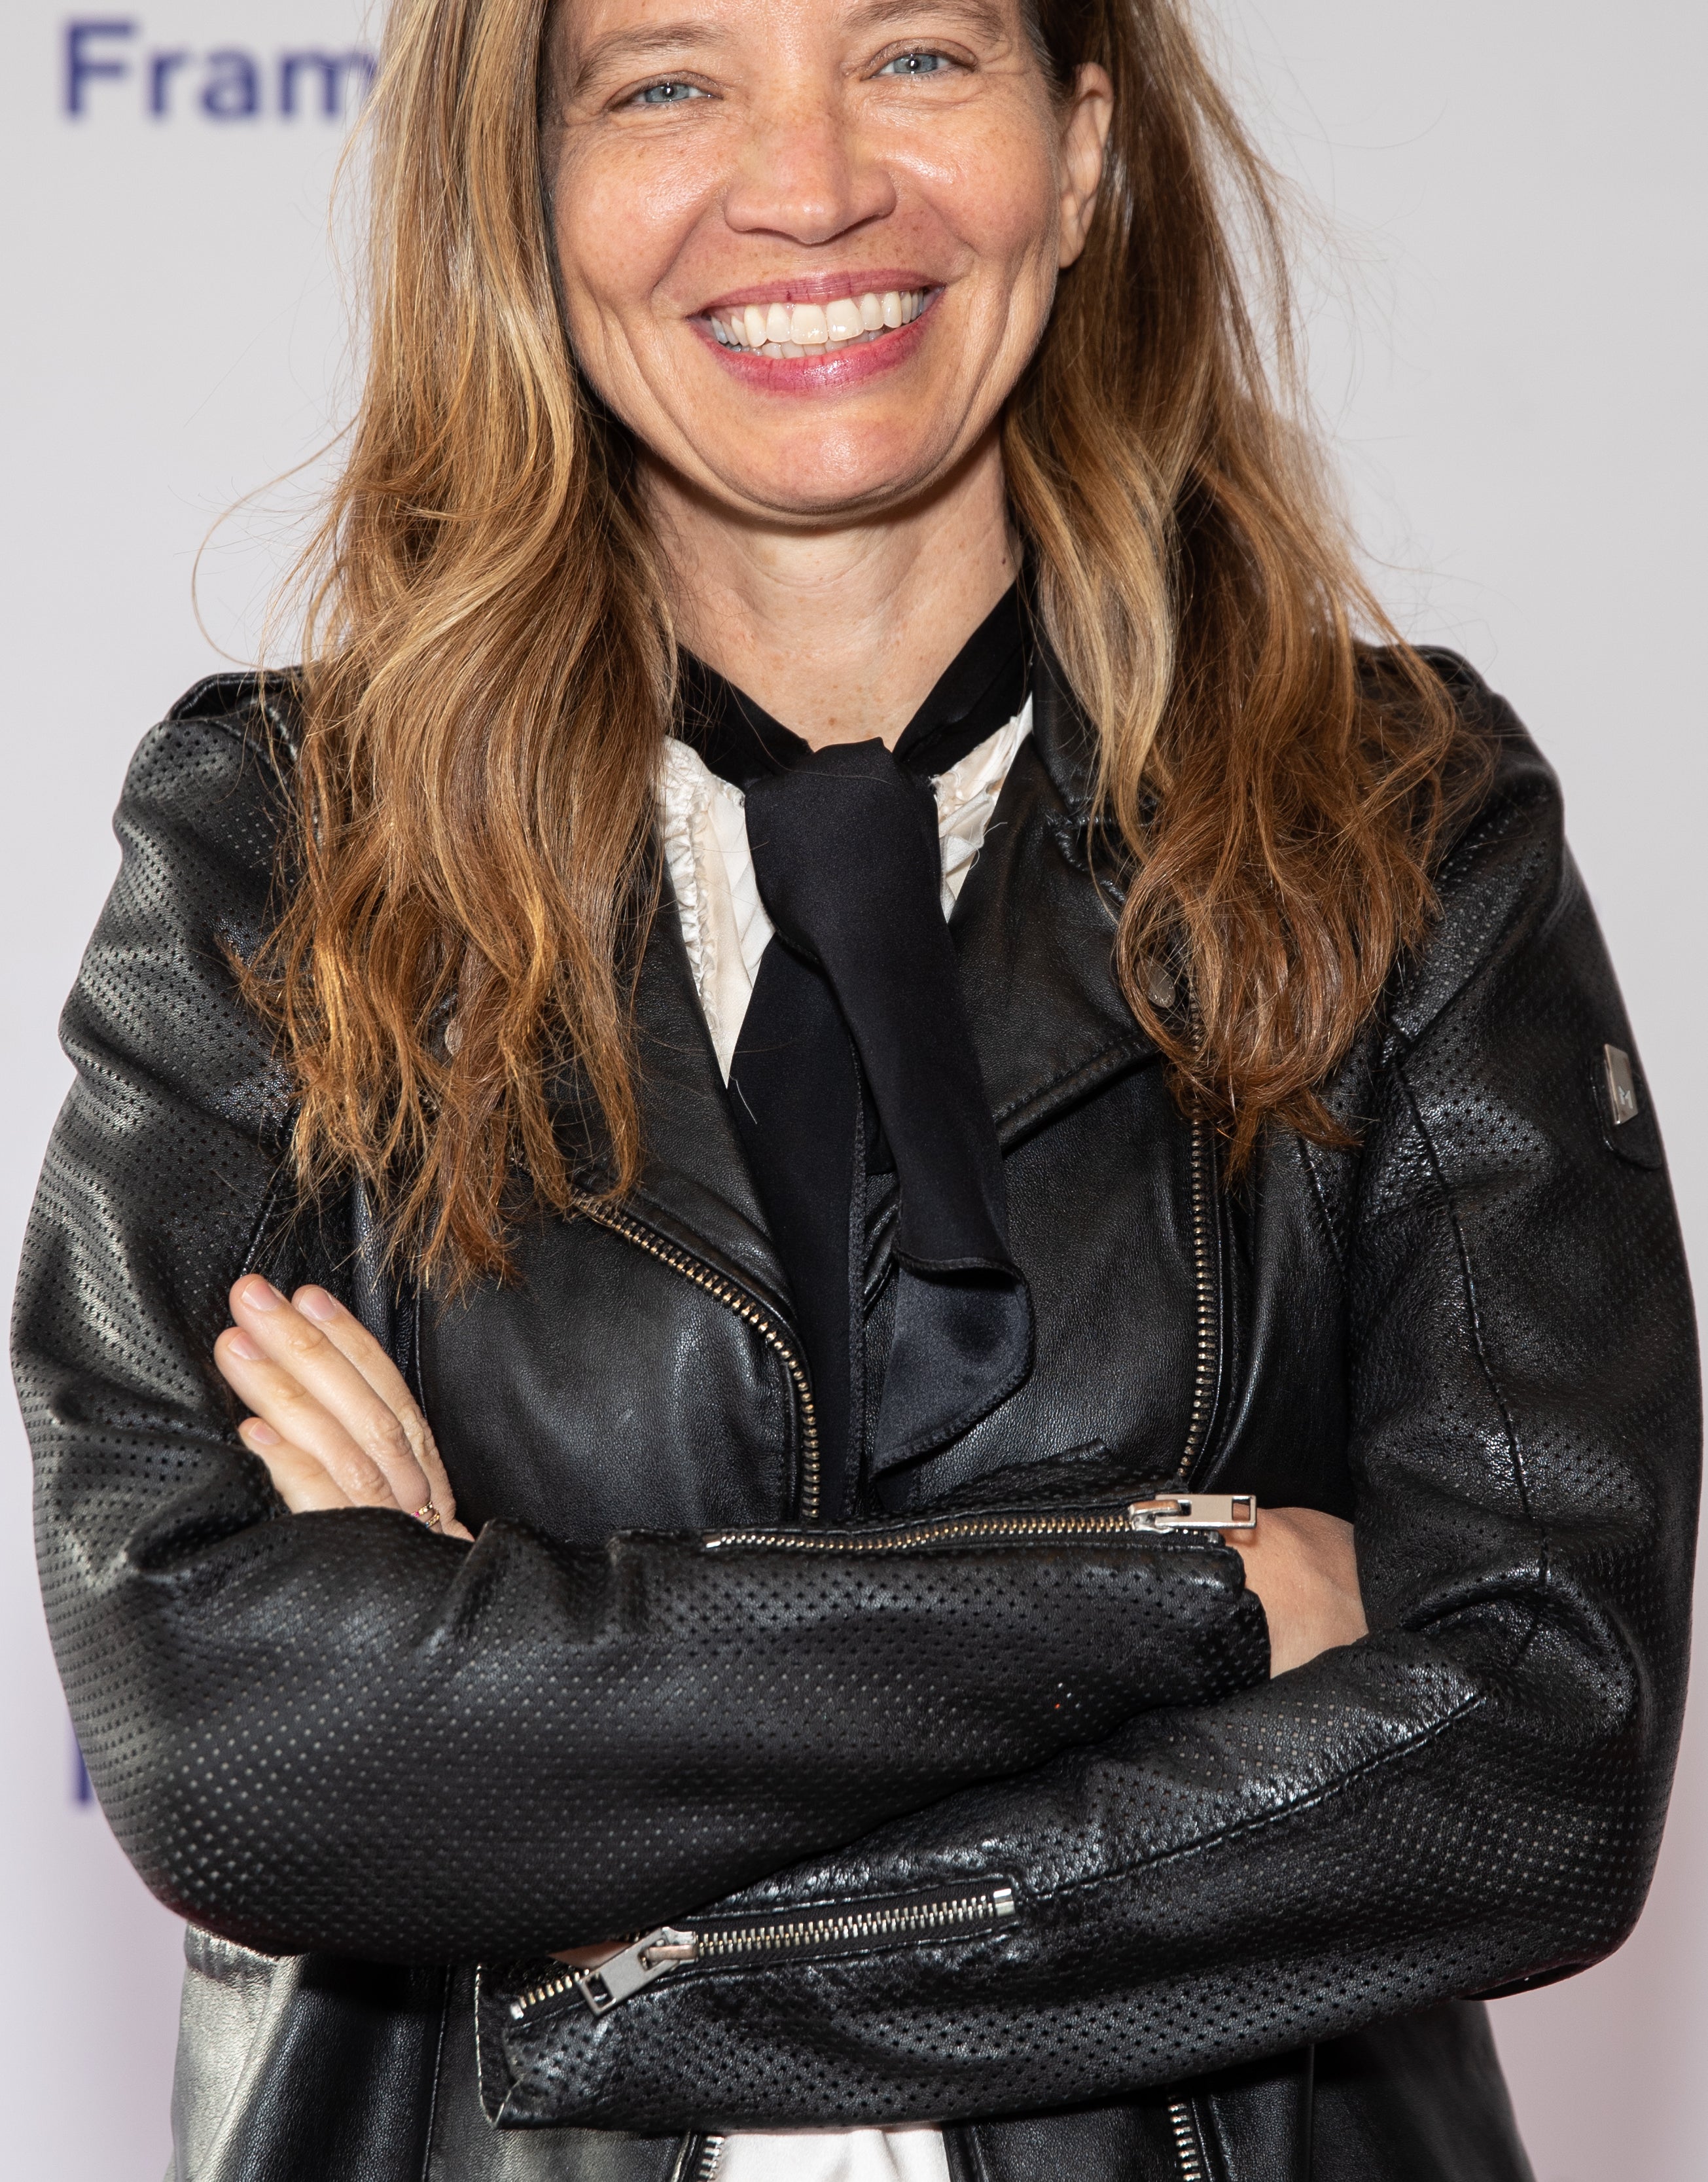 Jamie Babbit smiling in a black leather jacket and a black and white outfit, standing with arms crossed